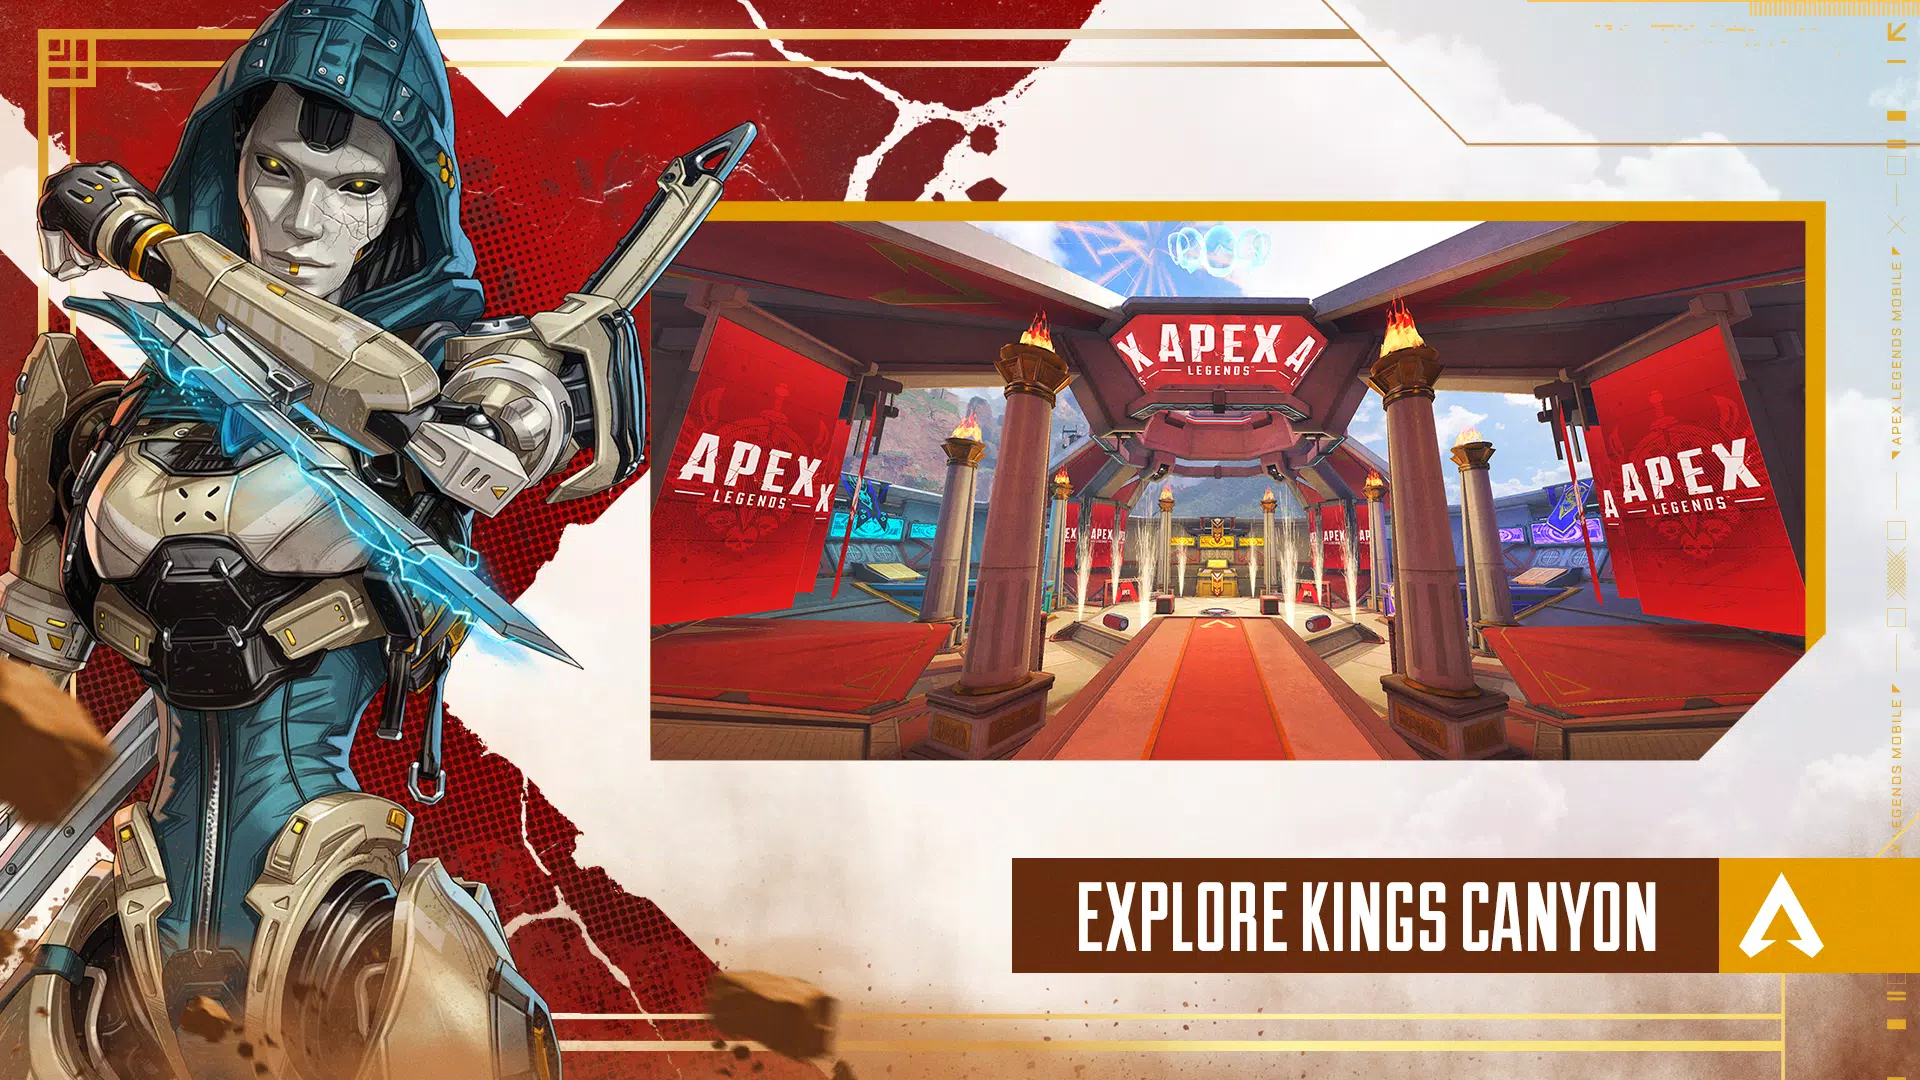 Apex Legends Mobile download link for Android devices and APK file size  revealed